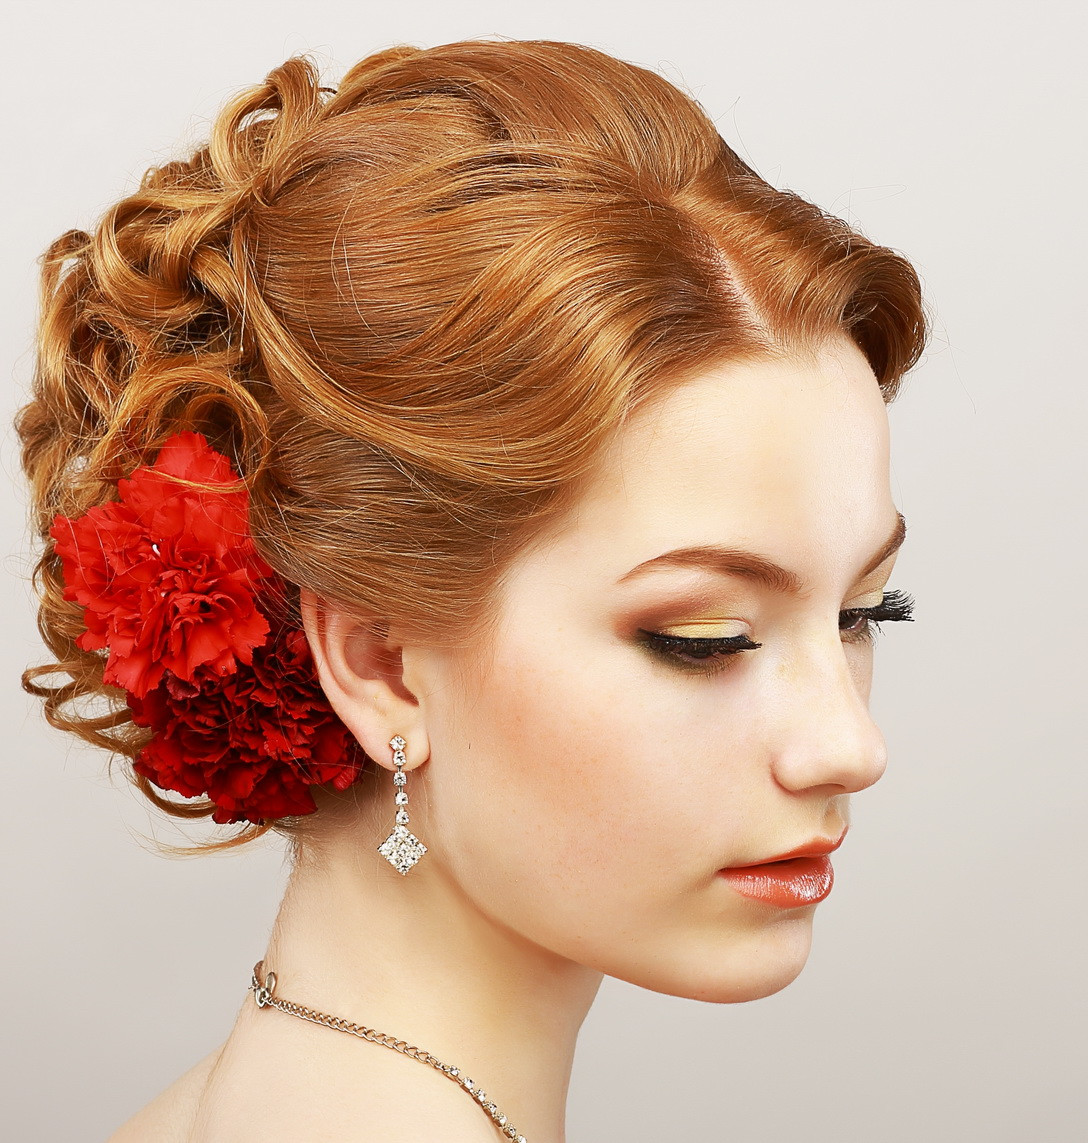 Short Prom Hairstyles
 16 Easy Prom Hairstyles for Short and Medium Length Hair